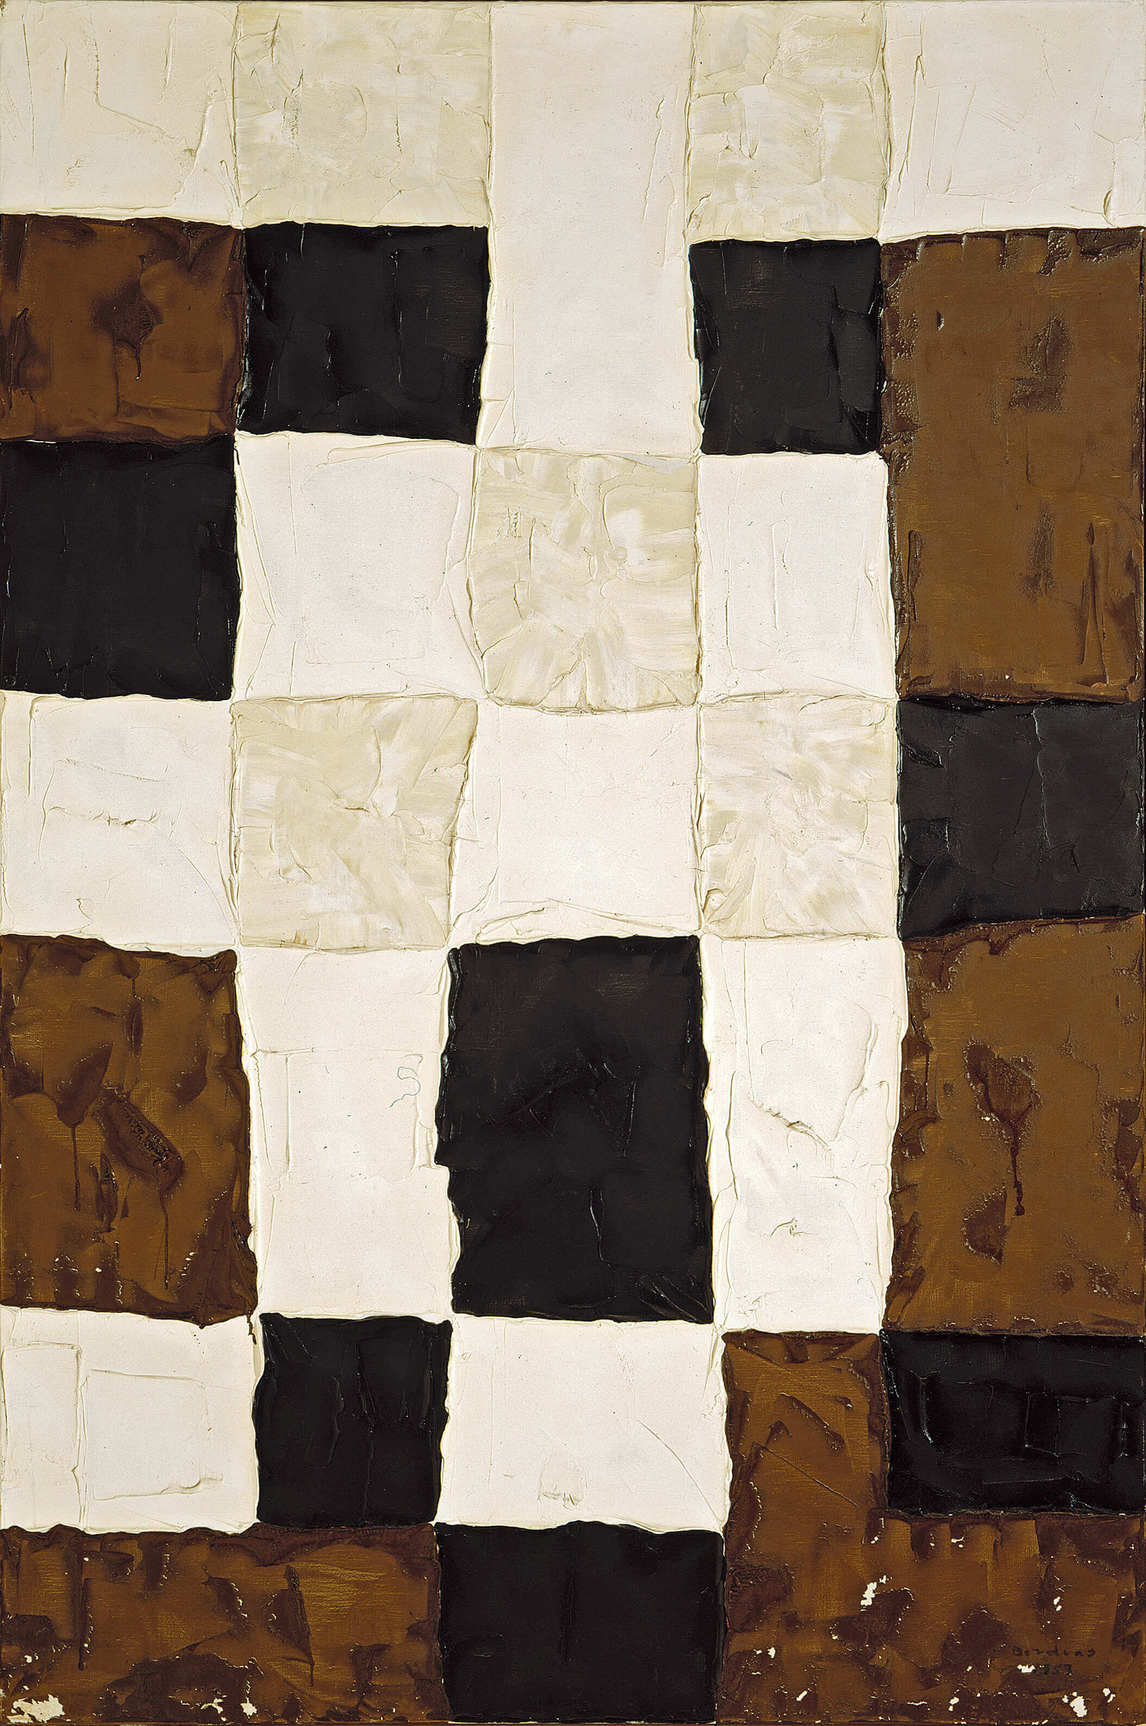 Art Canada Institute, Symphony on a White Checkerboard or Symphony 2, 1957